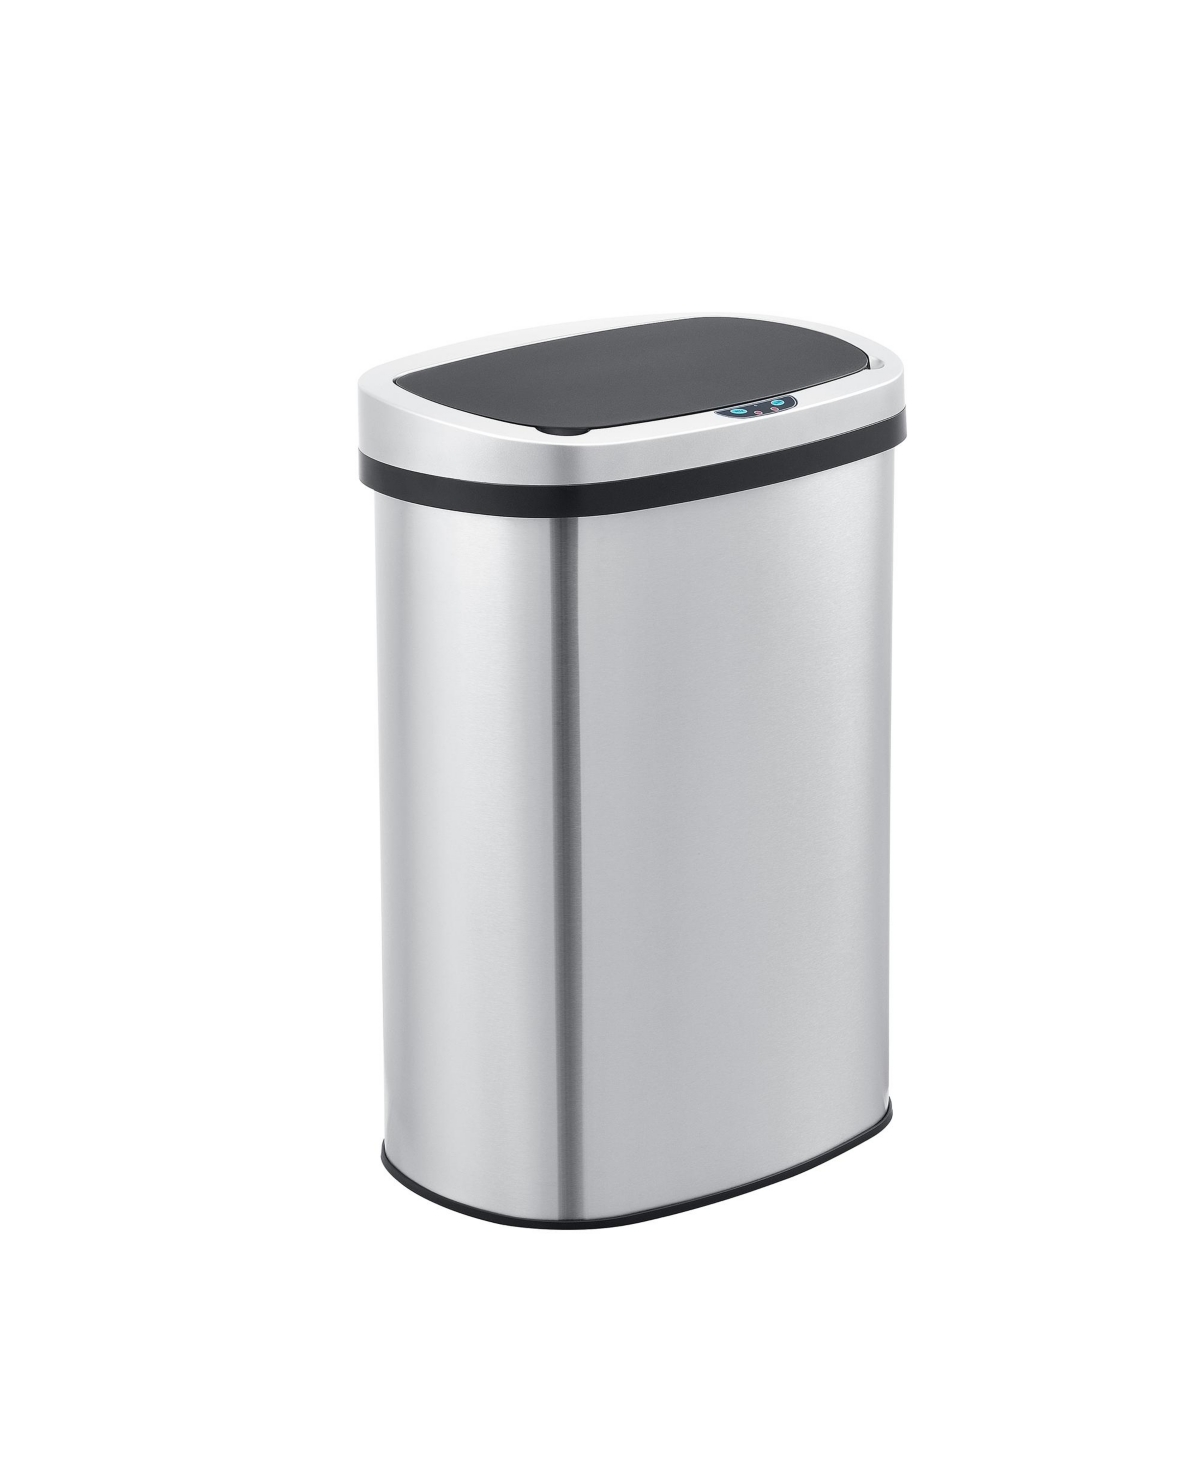 13 Gal./50 Liter Stainless Steel Oval Motion Sensor Trash Can for Kitchen - Silver